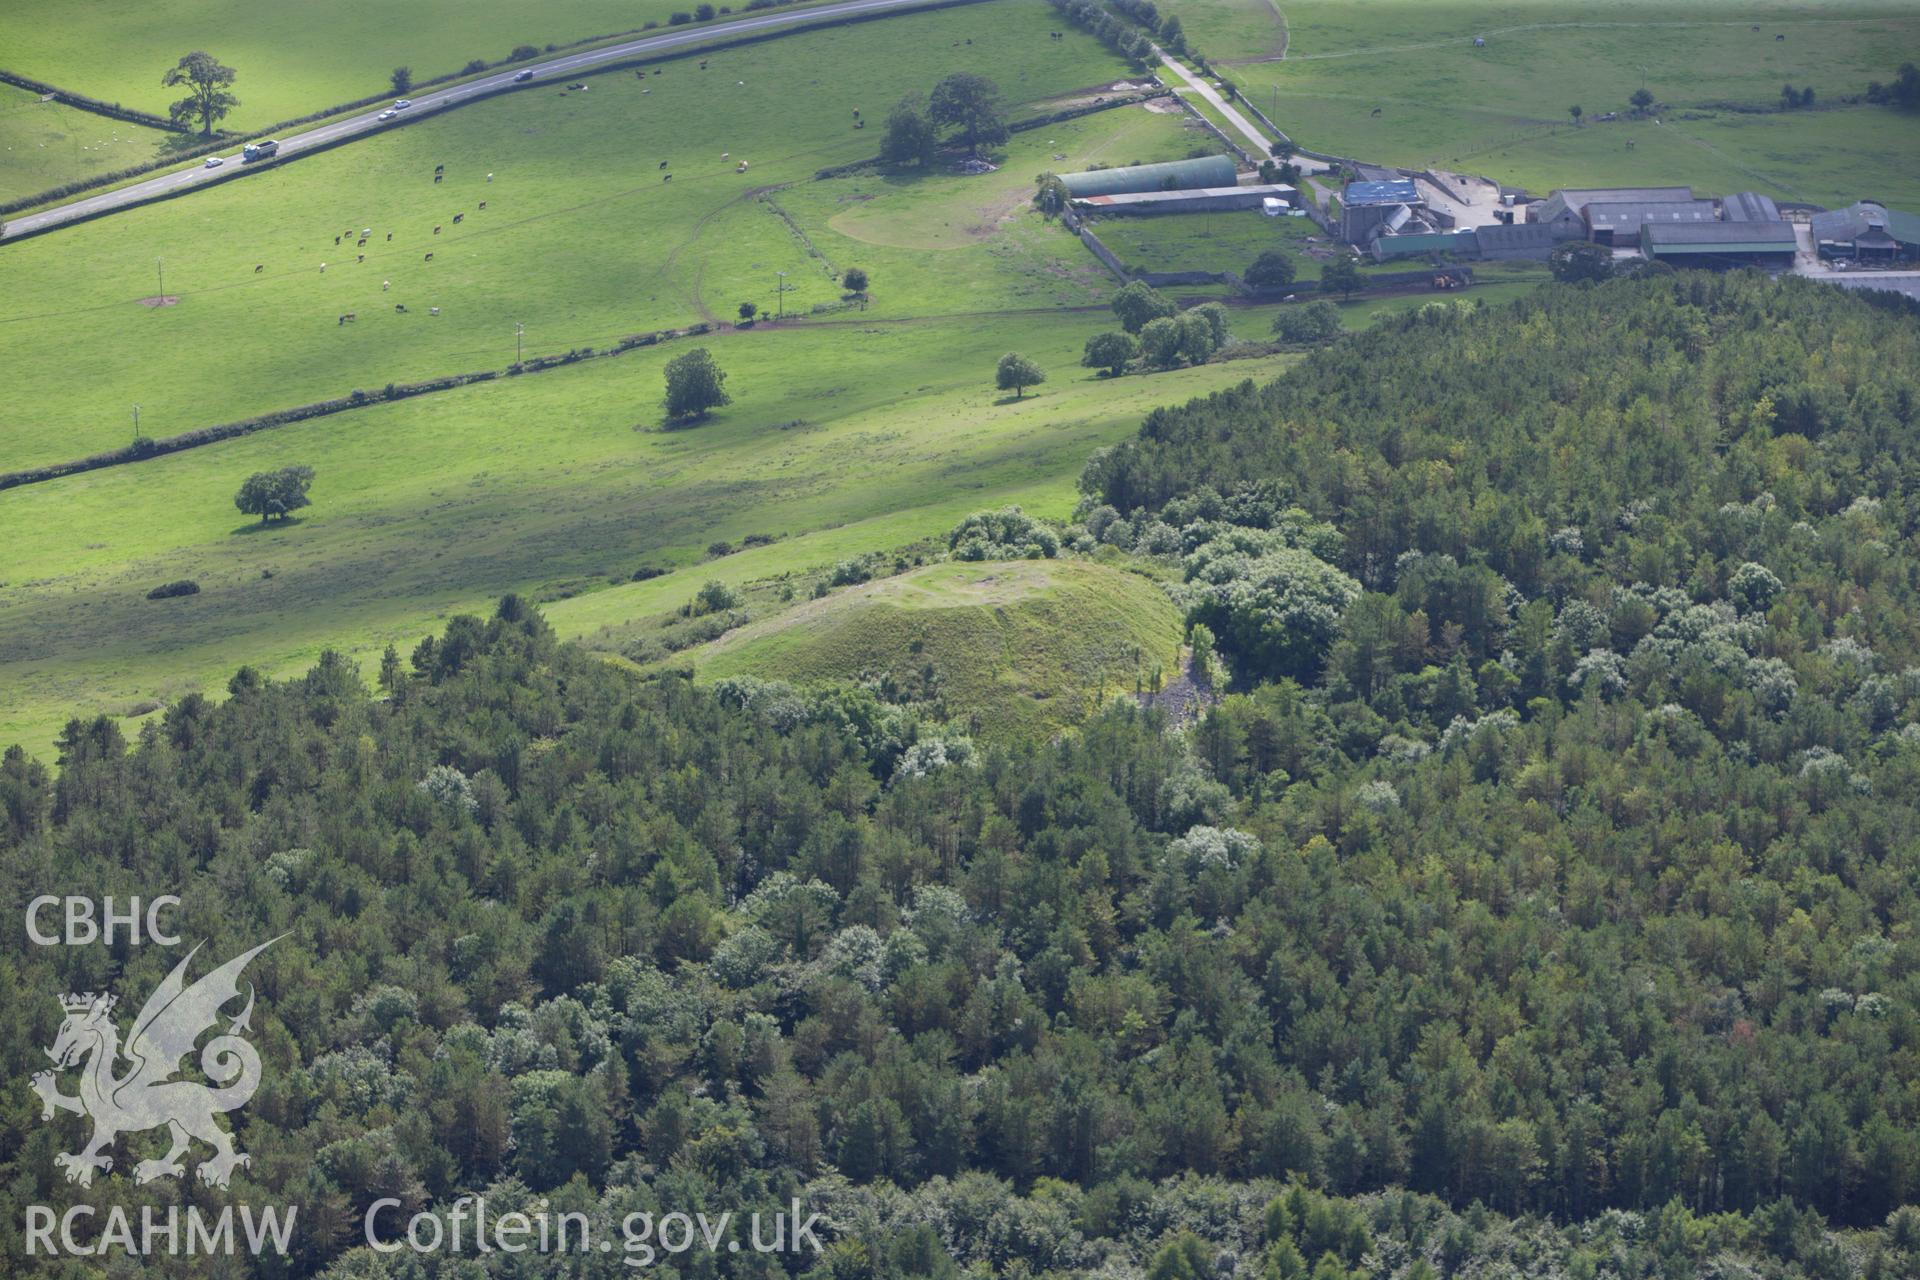 RCAHMW colour oblique aerial photograph of Gop Cairn. Taken on 30 July 2009 by Toby Driver